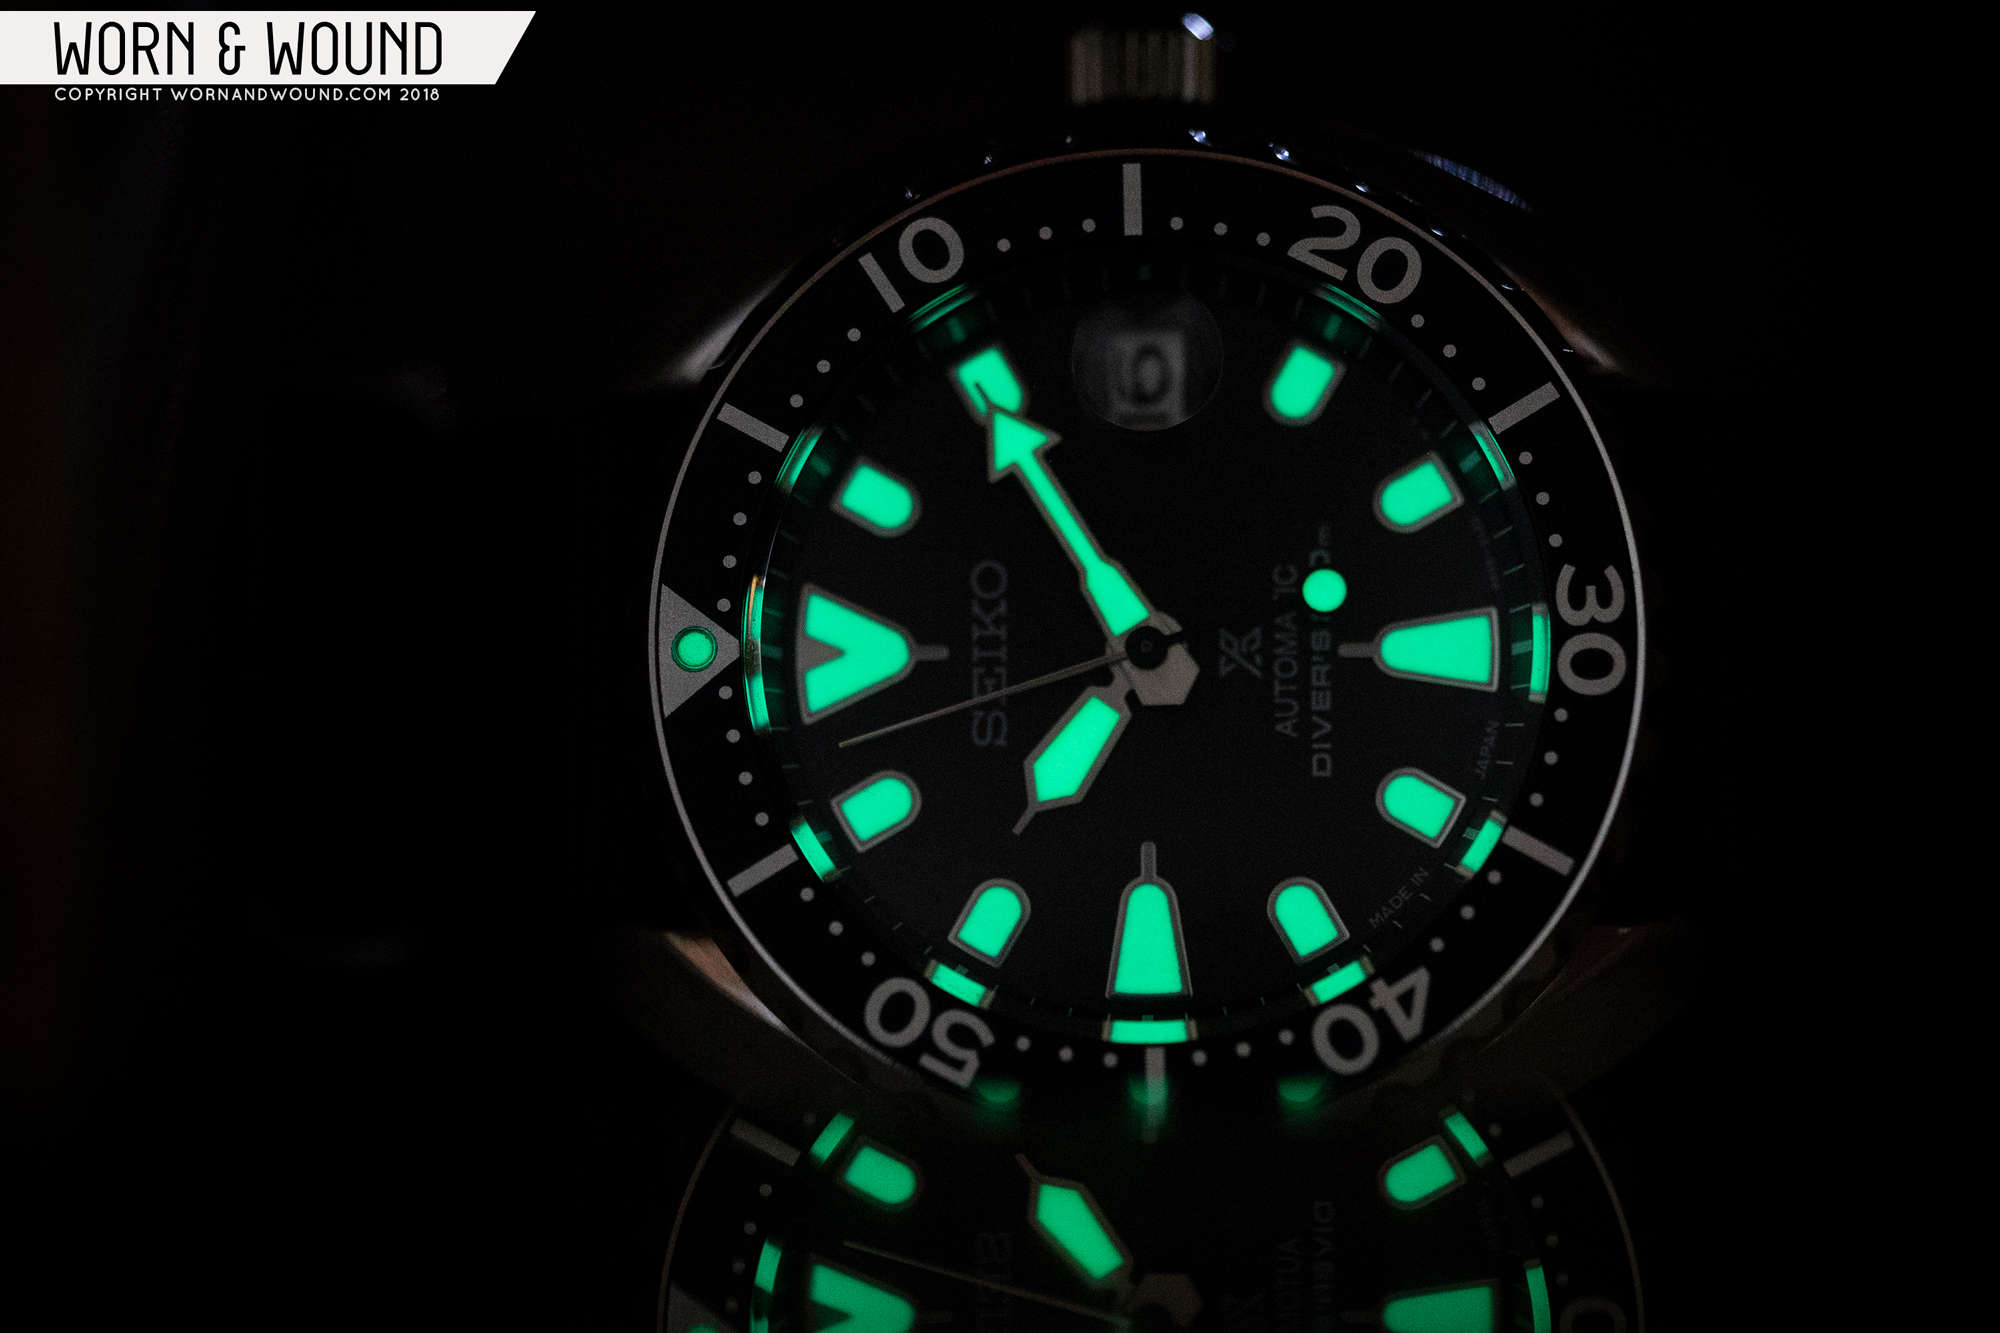 Review: Is the Seiko Mini-Turtle the New SKX007? - Worn & Wound